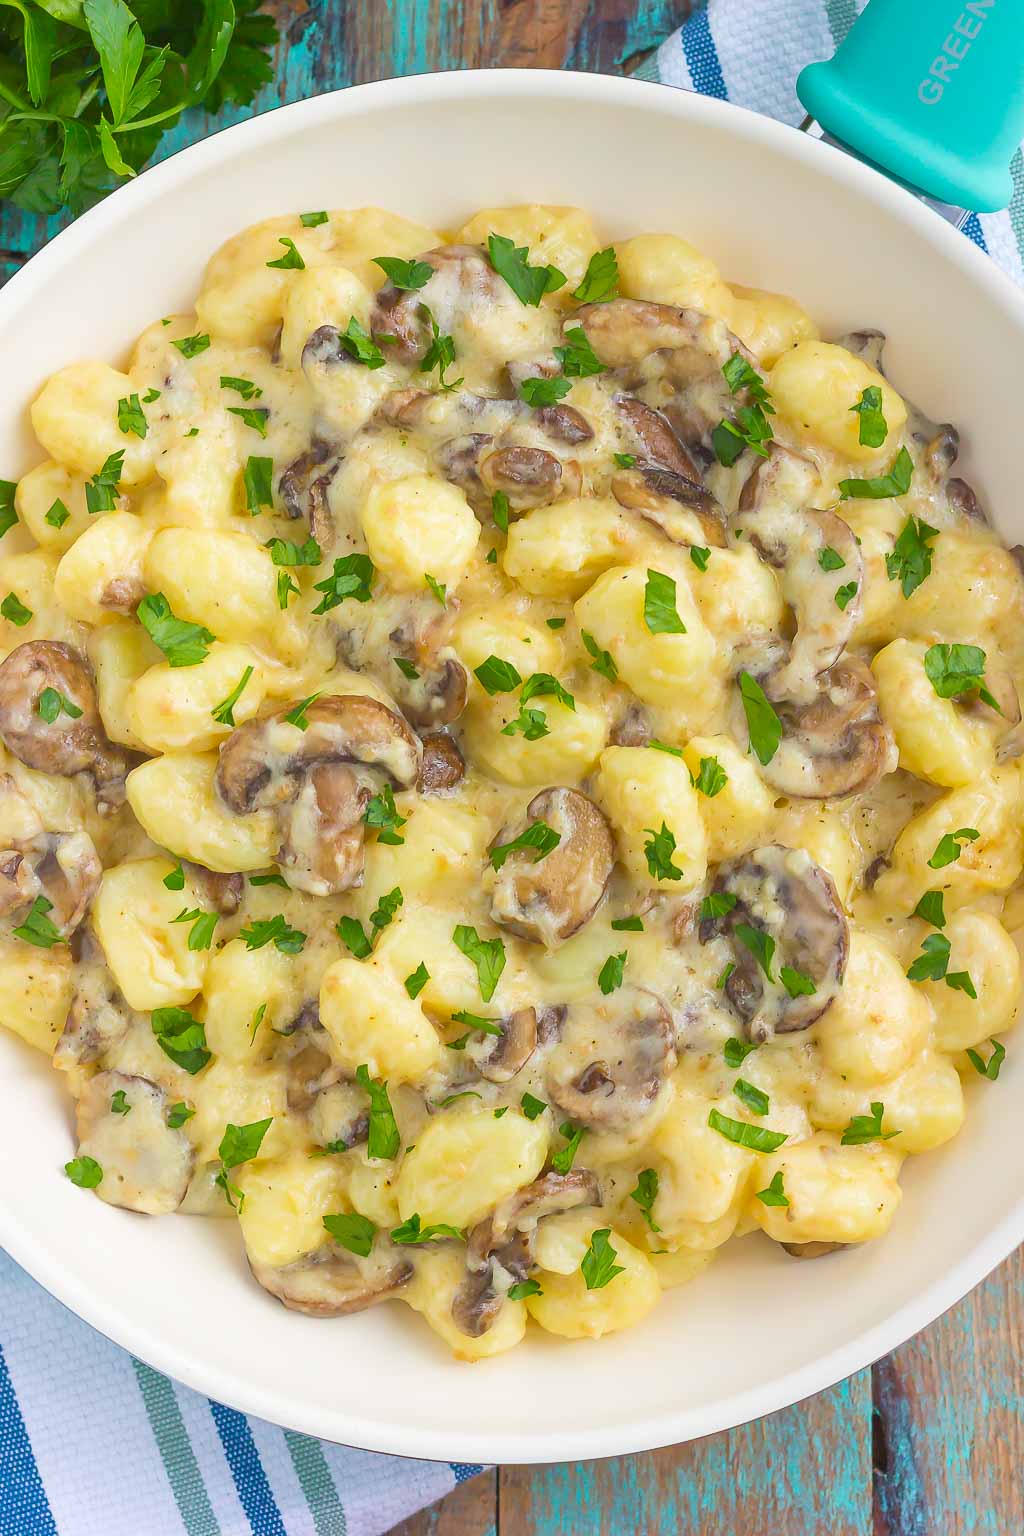 This Garlic Parmesan Gnocchi with Mushrooms is packed with flavor and makes a delicious 30 minute meal. Tender gnocchi is tossed in a garlic Parmesan cream sauce and sprinkled with sauteed mushrooms. Fast, fresh, and easy to make, this will become a new favorite in your dinner rotation!